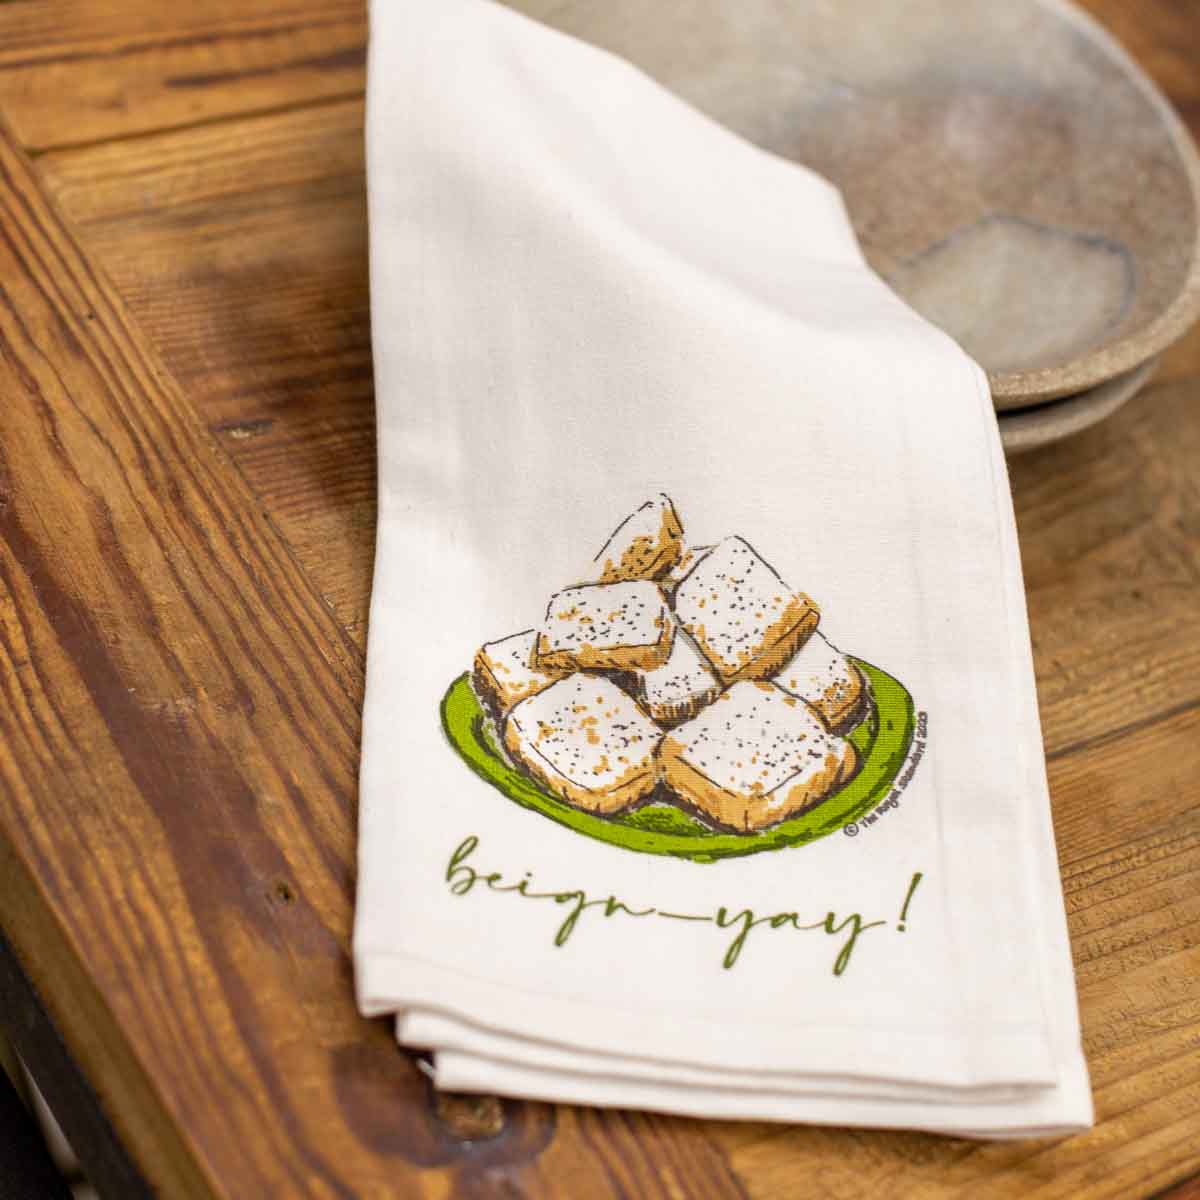 The Royal Standard The Royal Standard Beign-yay Hand Towel - Little Miss Muffin Children & Home